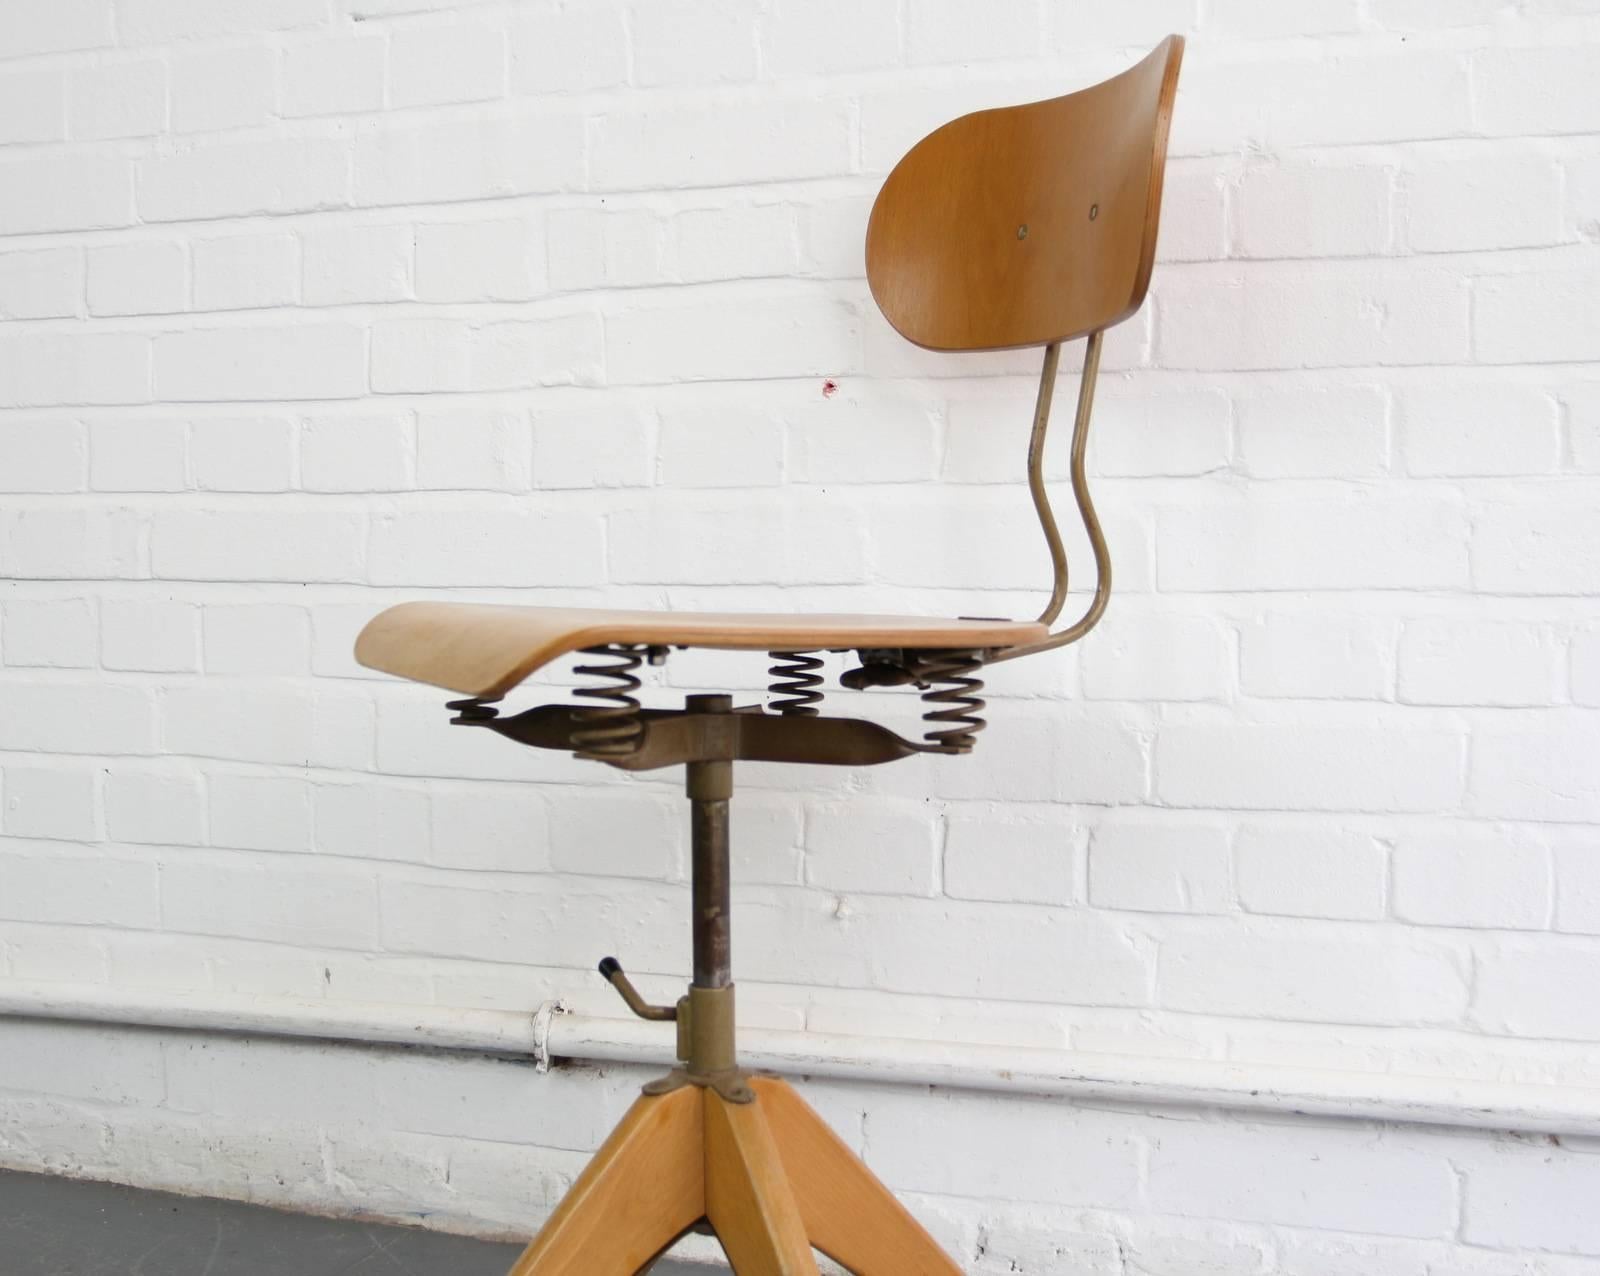 Ergonomic sprung chair by Polstergleich, circa 1950s 

Product code #OA478

- Bentwood seat and backrest
- Sprung seat and backrest
- Height adjustable
- Designed by Margarete Klober
- German, circa 1950s
- Measure: 39cm wide x 49cm deep
-